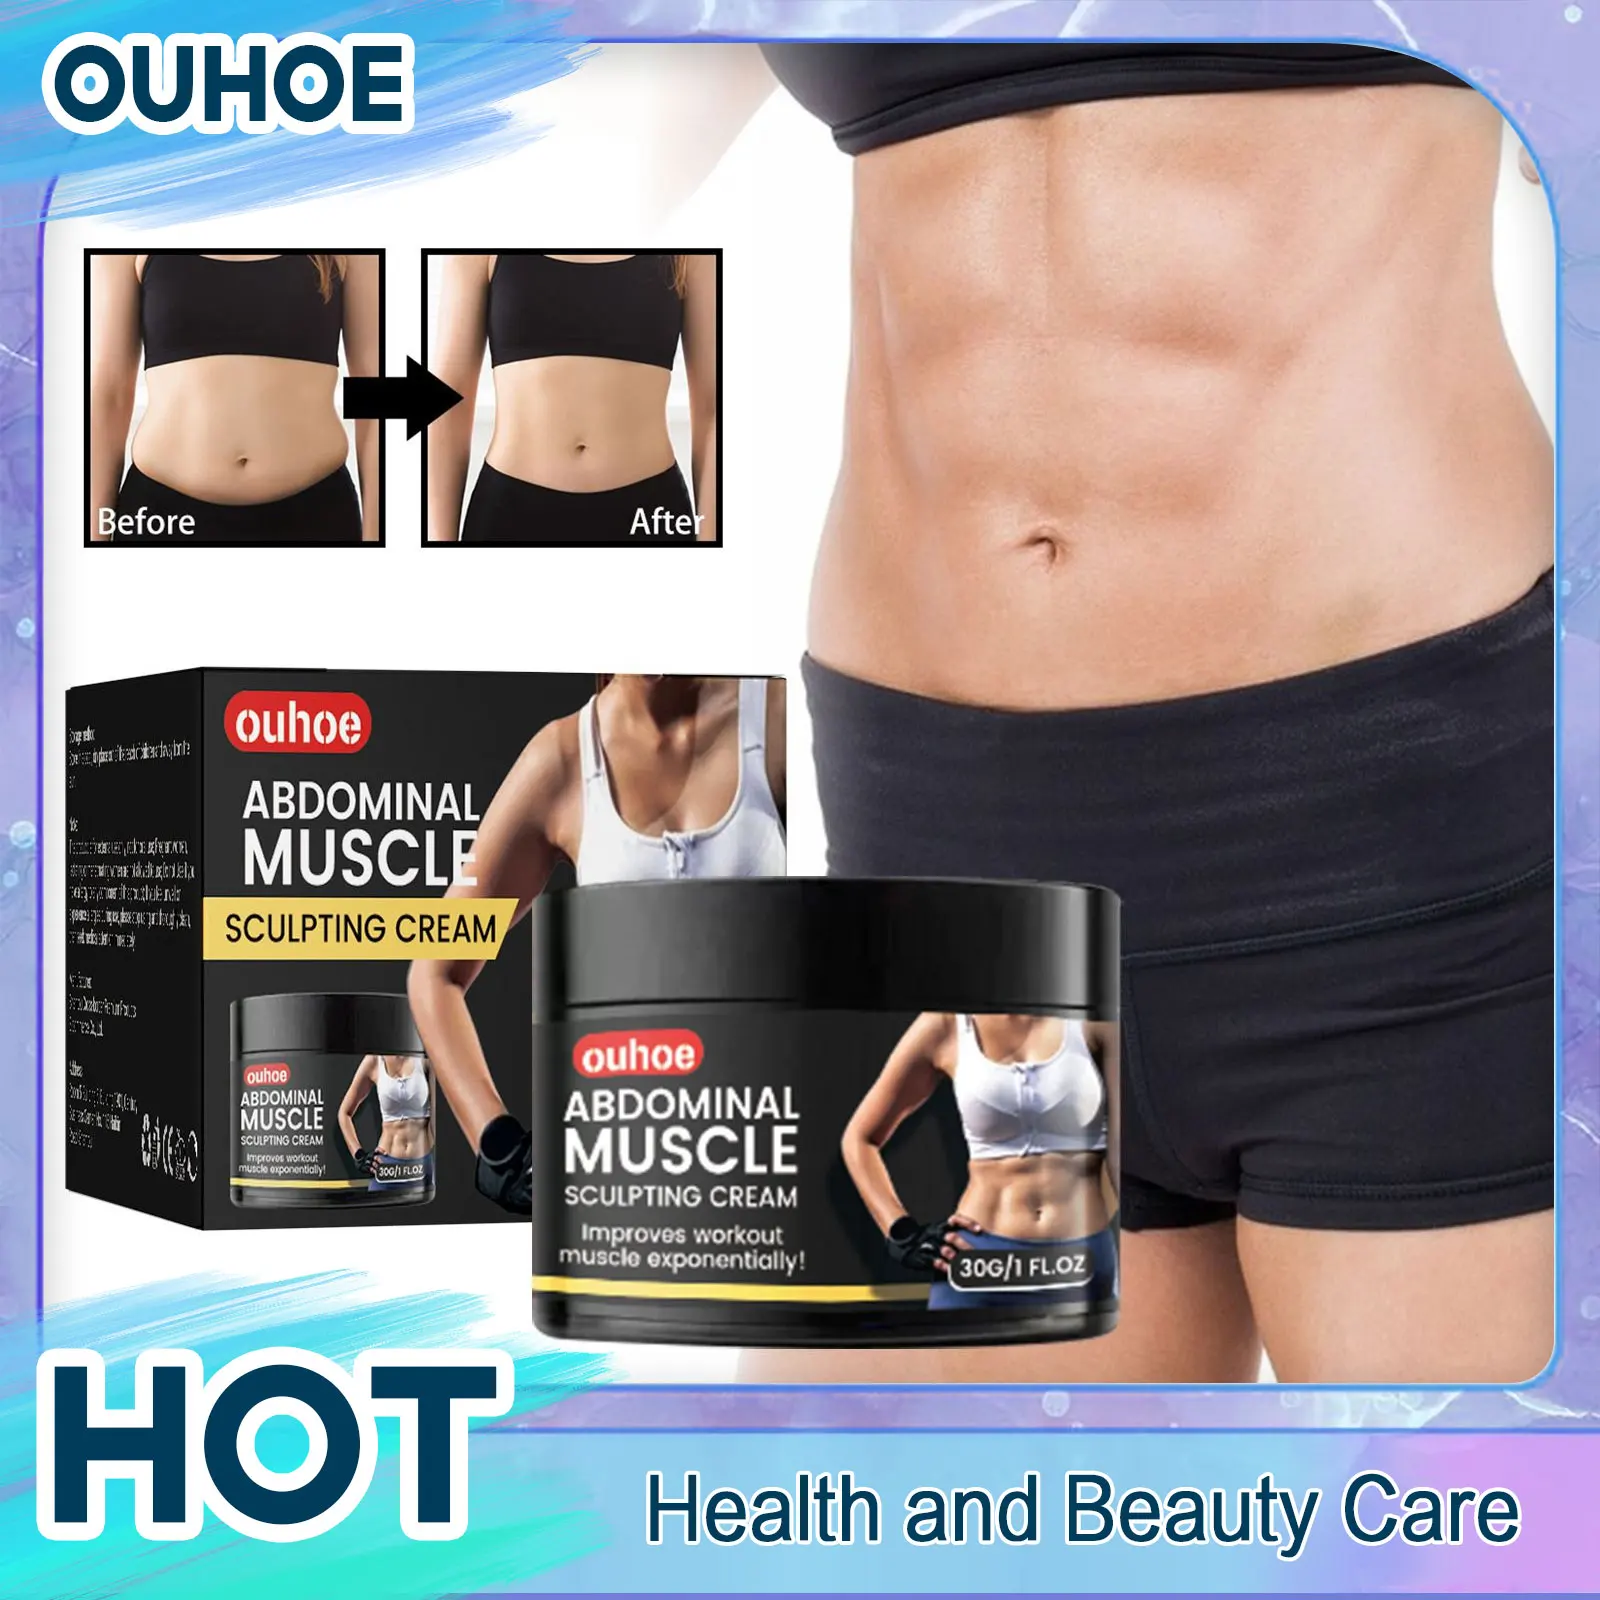 Belly Fat Burner Cream Weight Loss Firming Shaping Waist Lines Fitness Abdominal Muscle Flat Tummy Anti Cellulite Slimming Cream lazawg mens neoprene belts slimming body shaper waist trainer belt weight loss tummy fitness corsets belly sweat fat burner